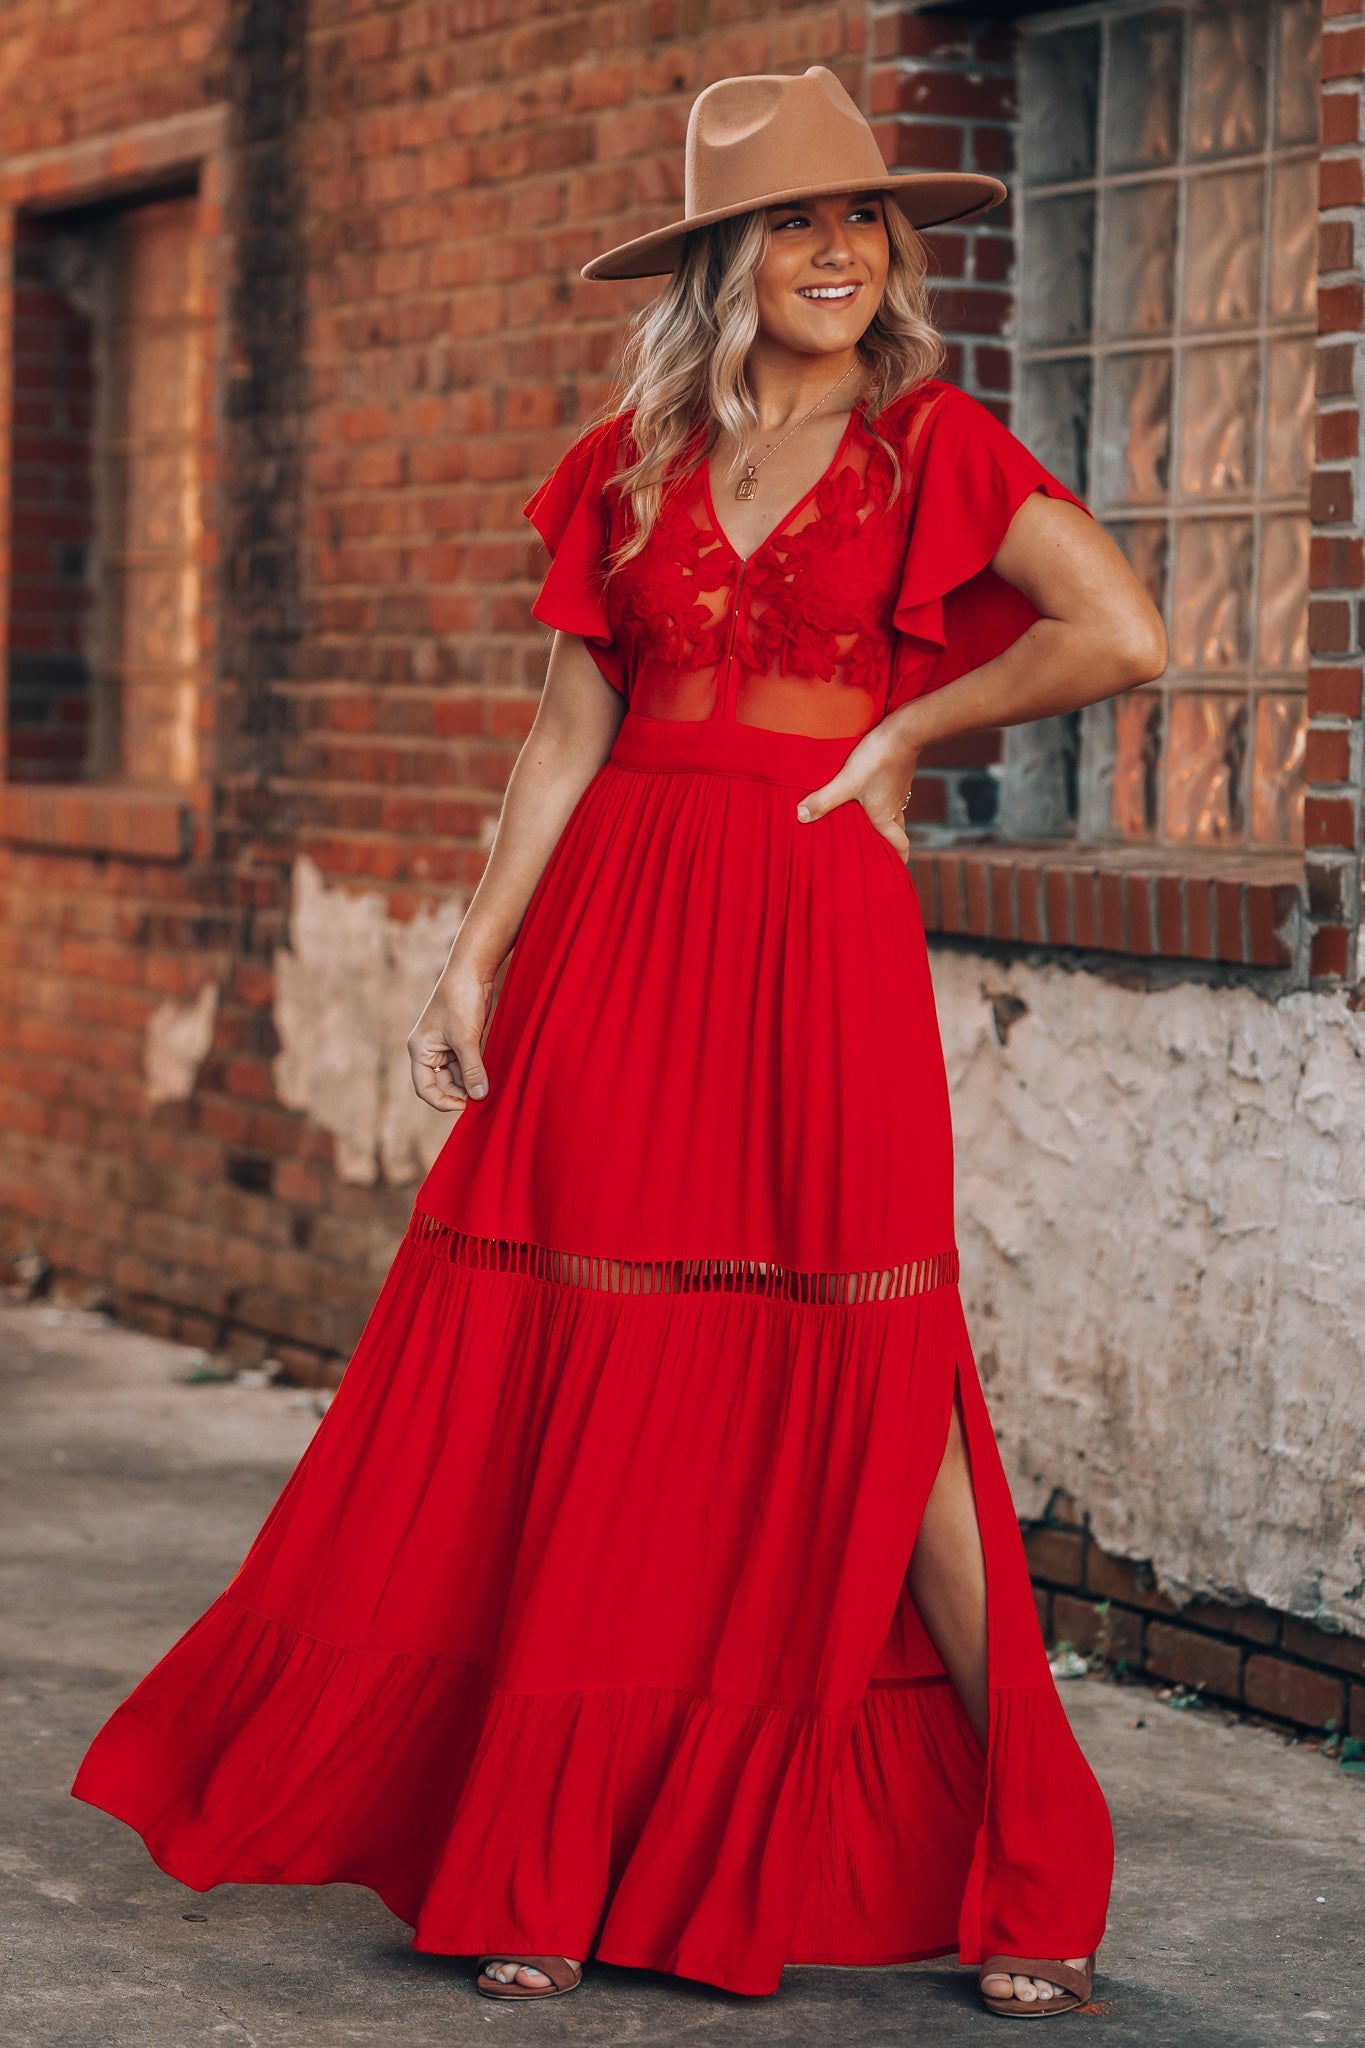 Skylar Embroidered Maxi Dress (Red) FINAL SALE